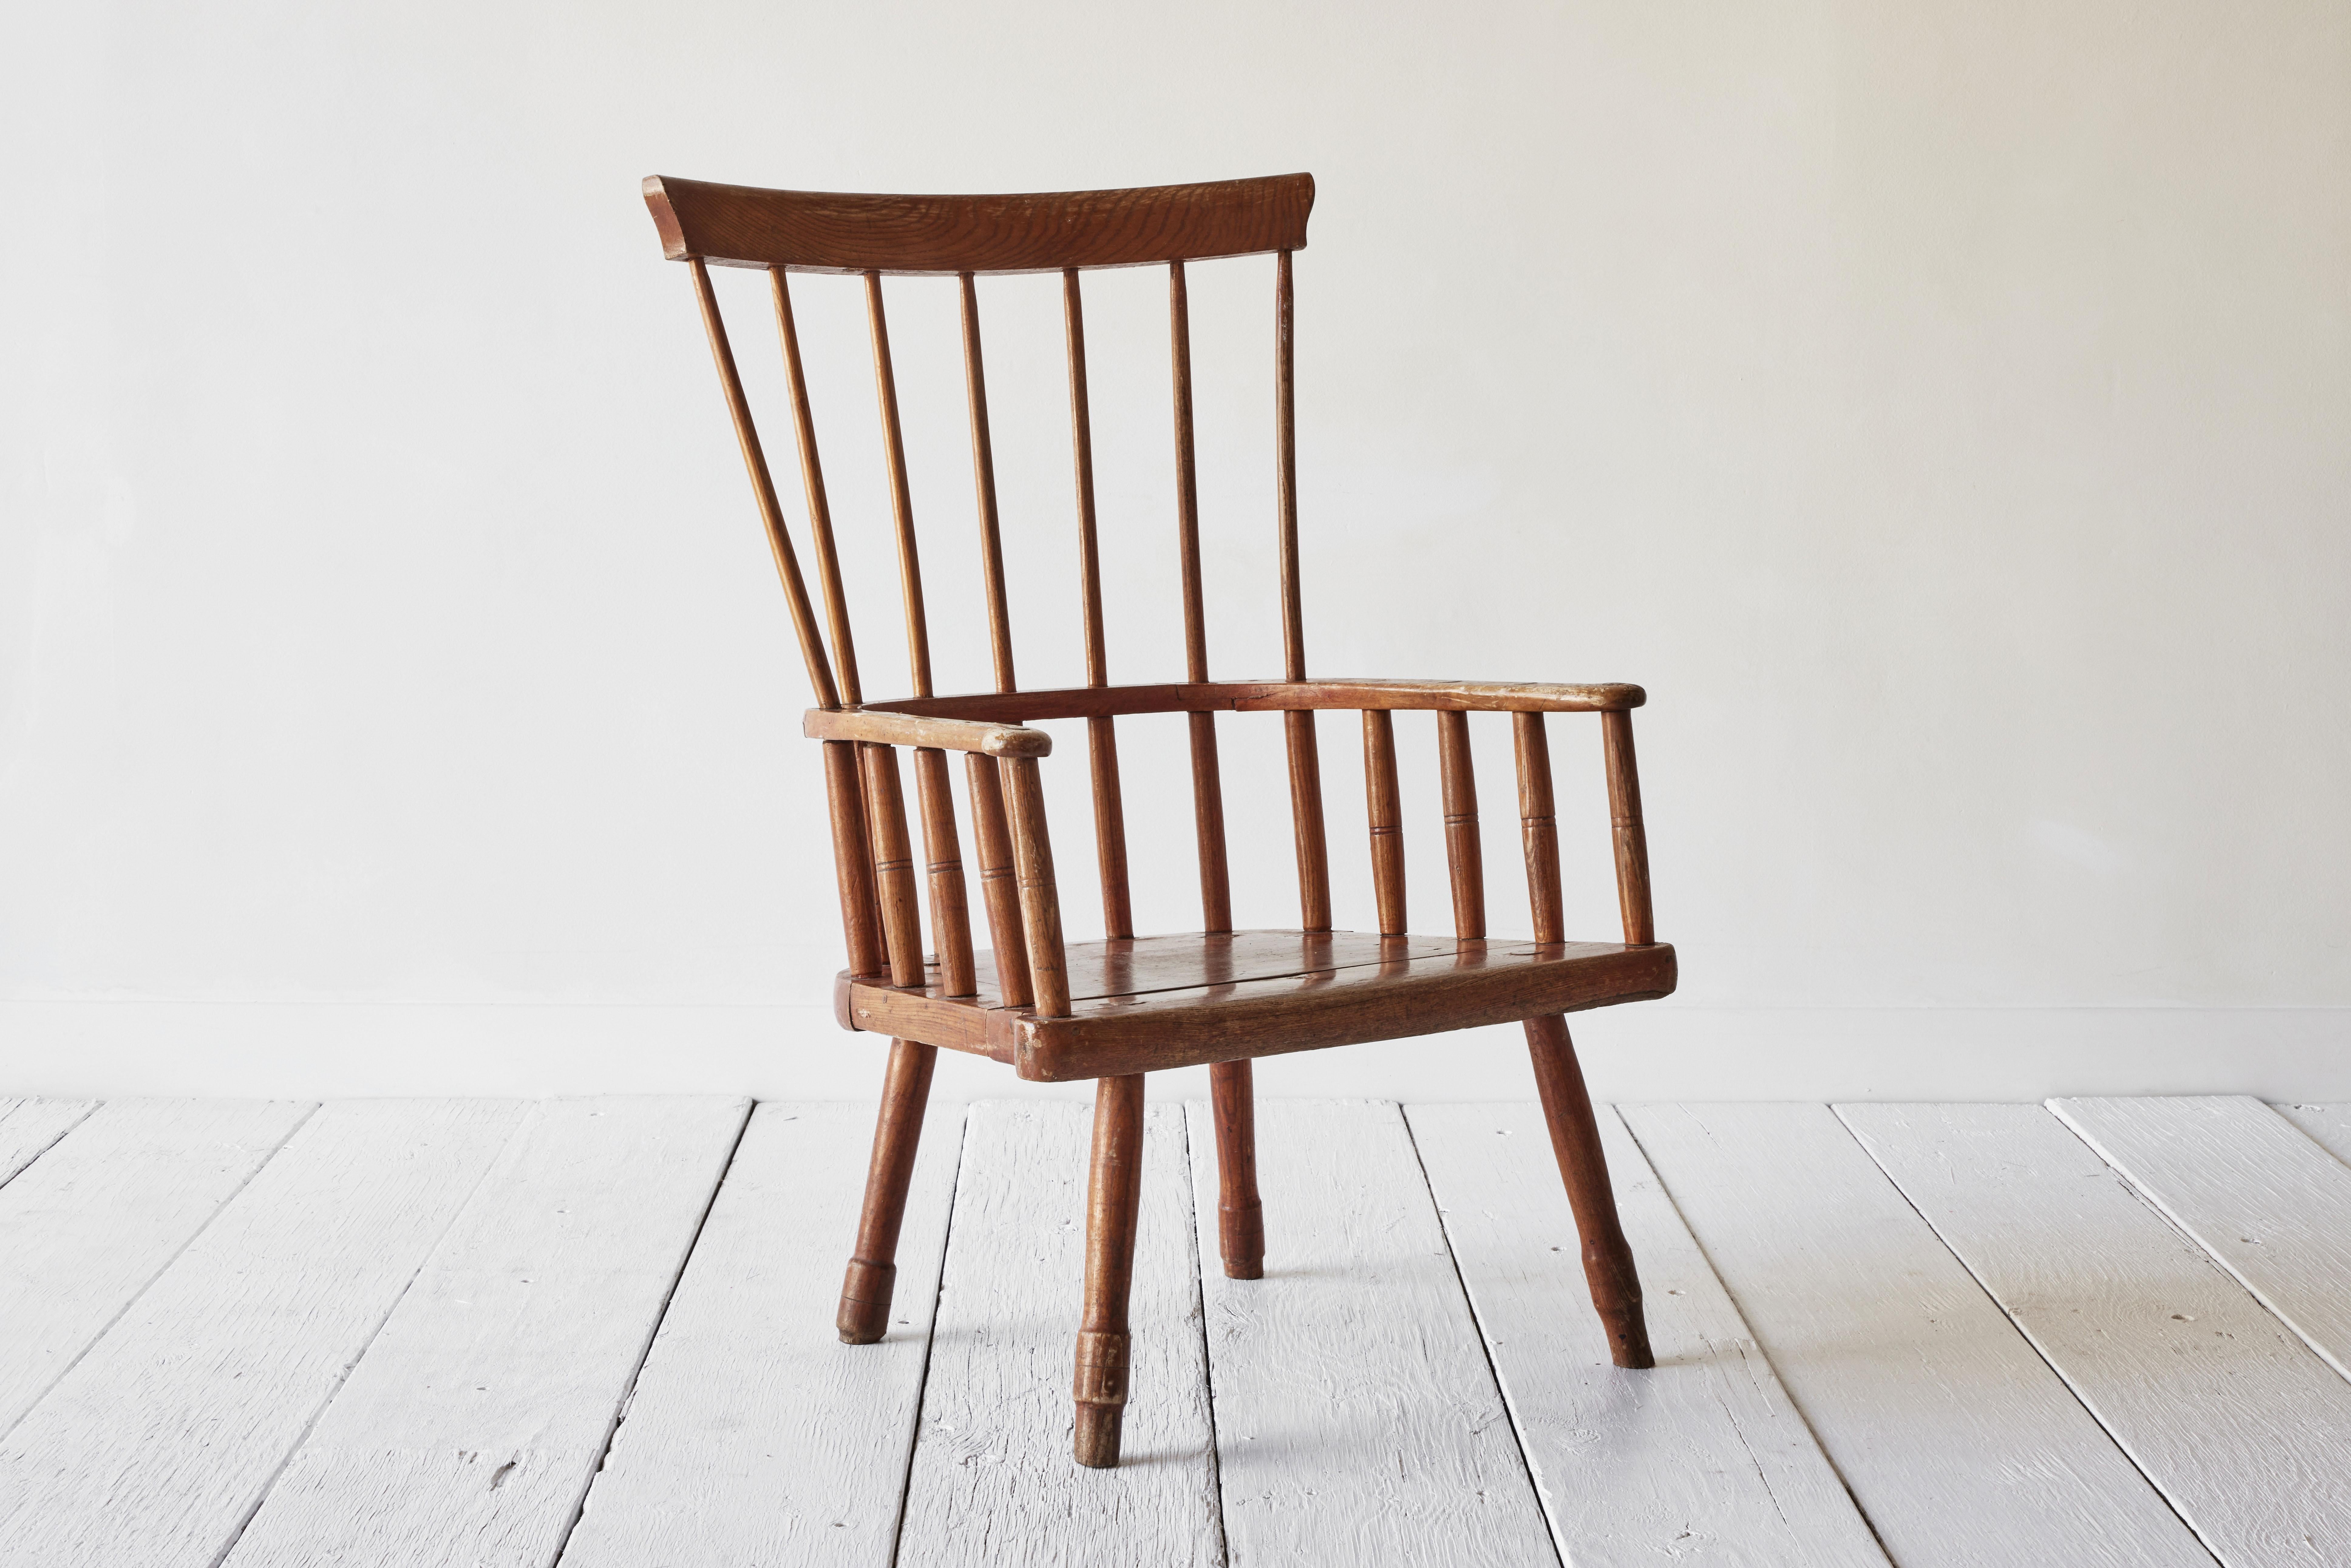 This classic American fan-back Windsor chair features a bentwood back, splayed legs pegged directly into the seat, armrests that extend around the chair and a spindle back. All of these attributes are characteristic of Windsor chairs which